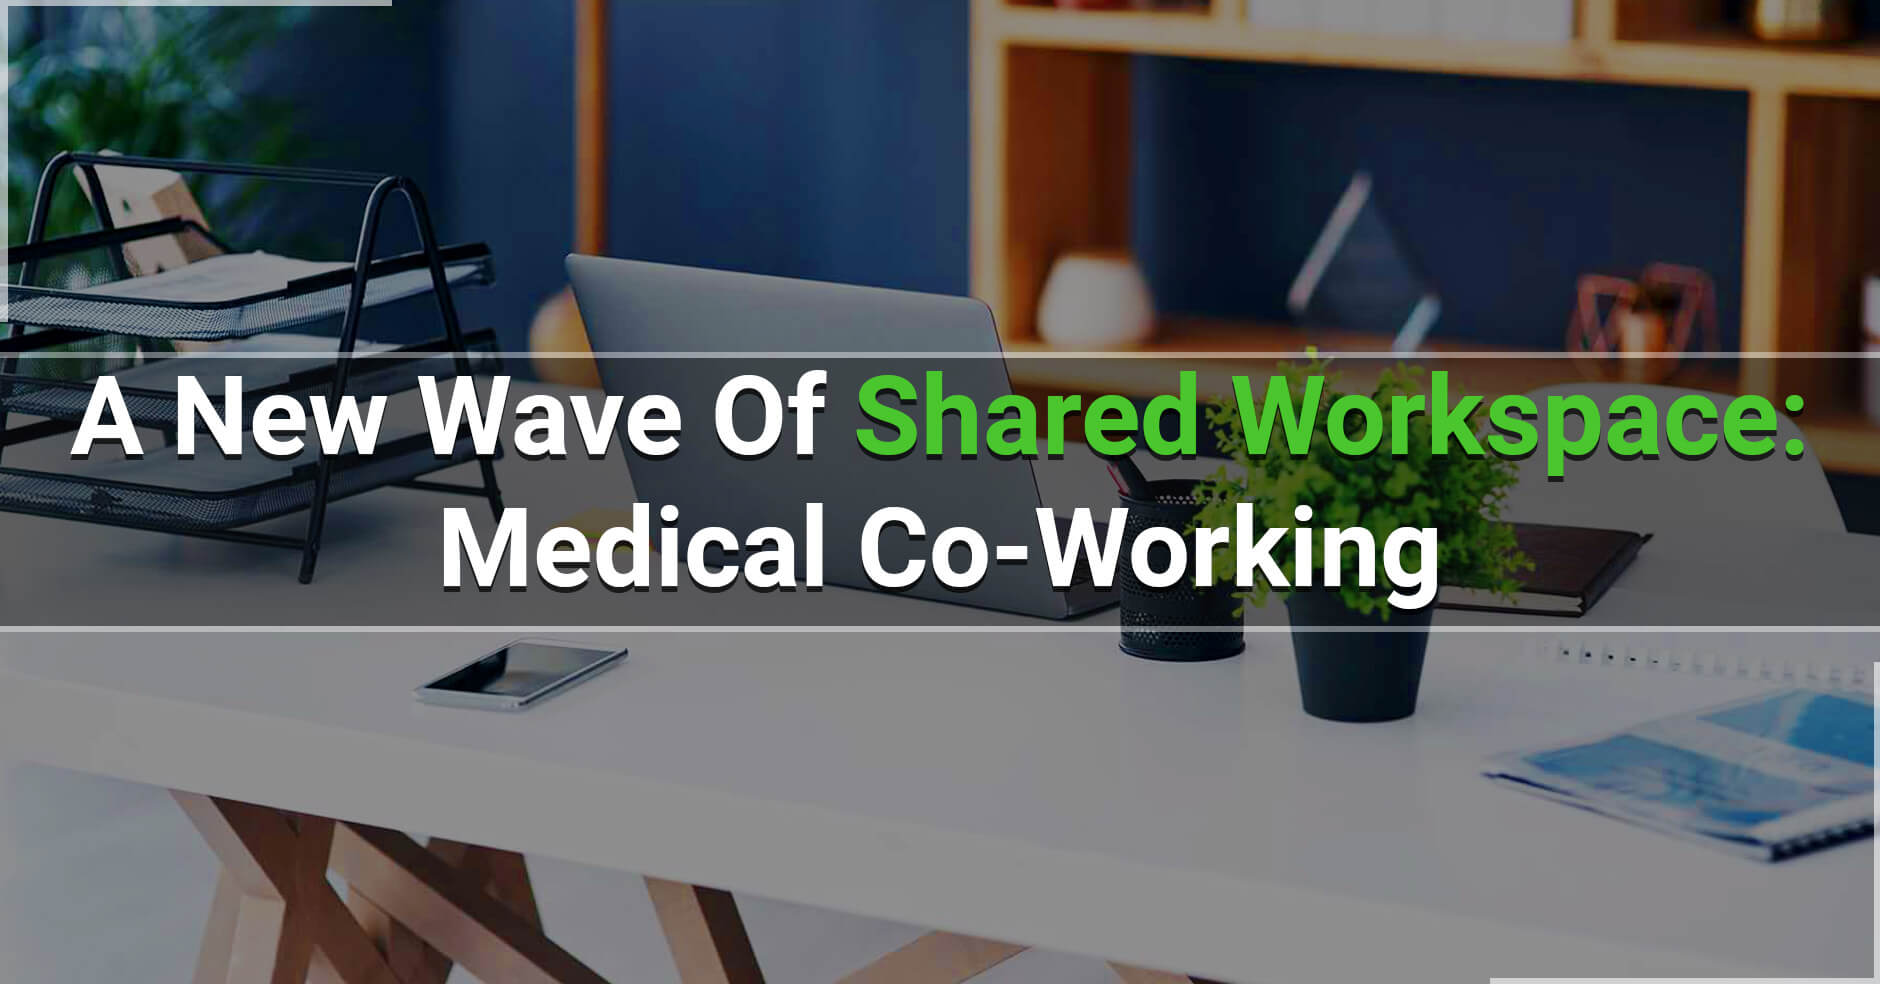 A new wave of shared workspace